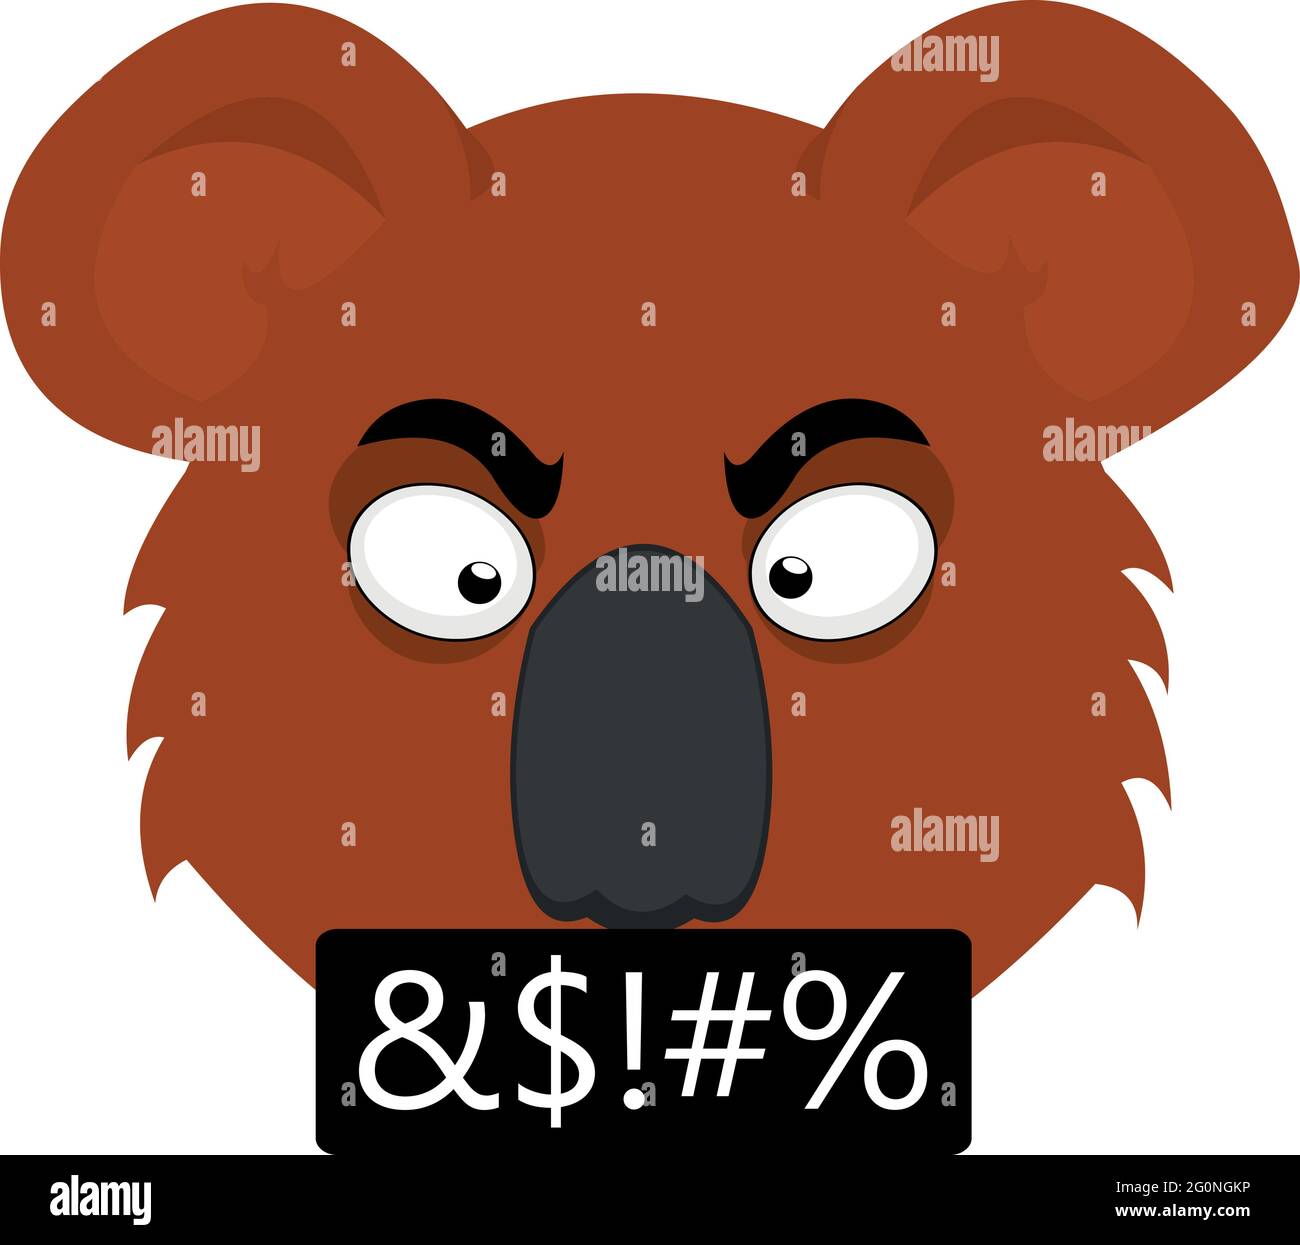 Vector emoticon illustration of the face of an angry and insulting cartoon koala Stock Vector